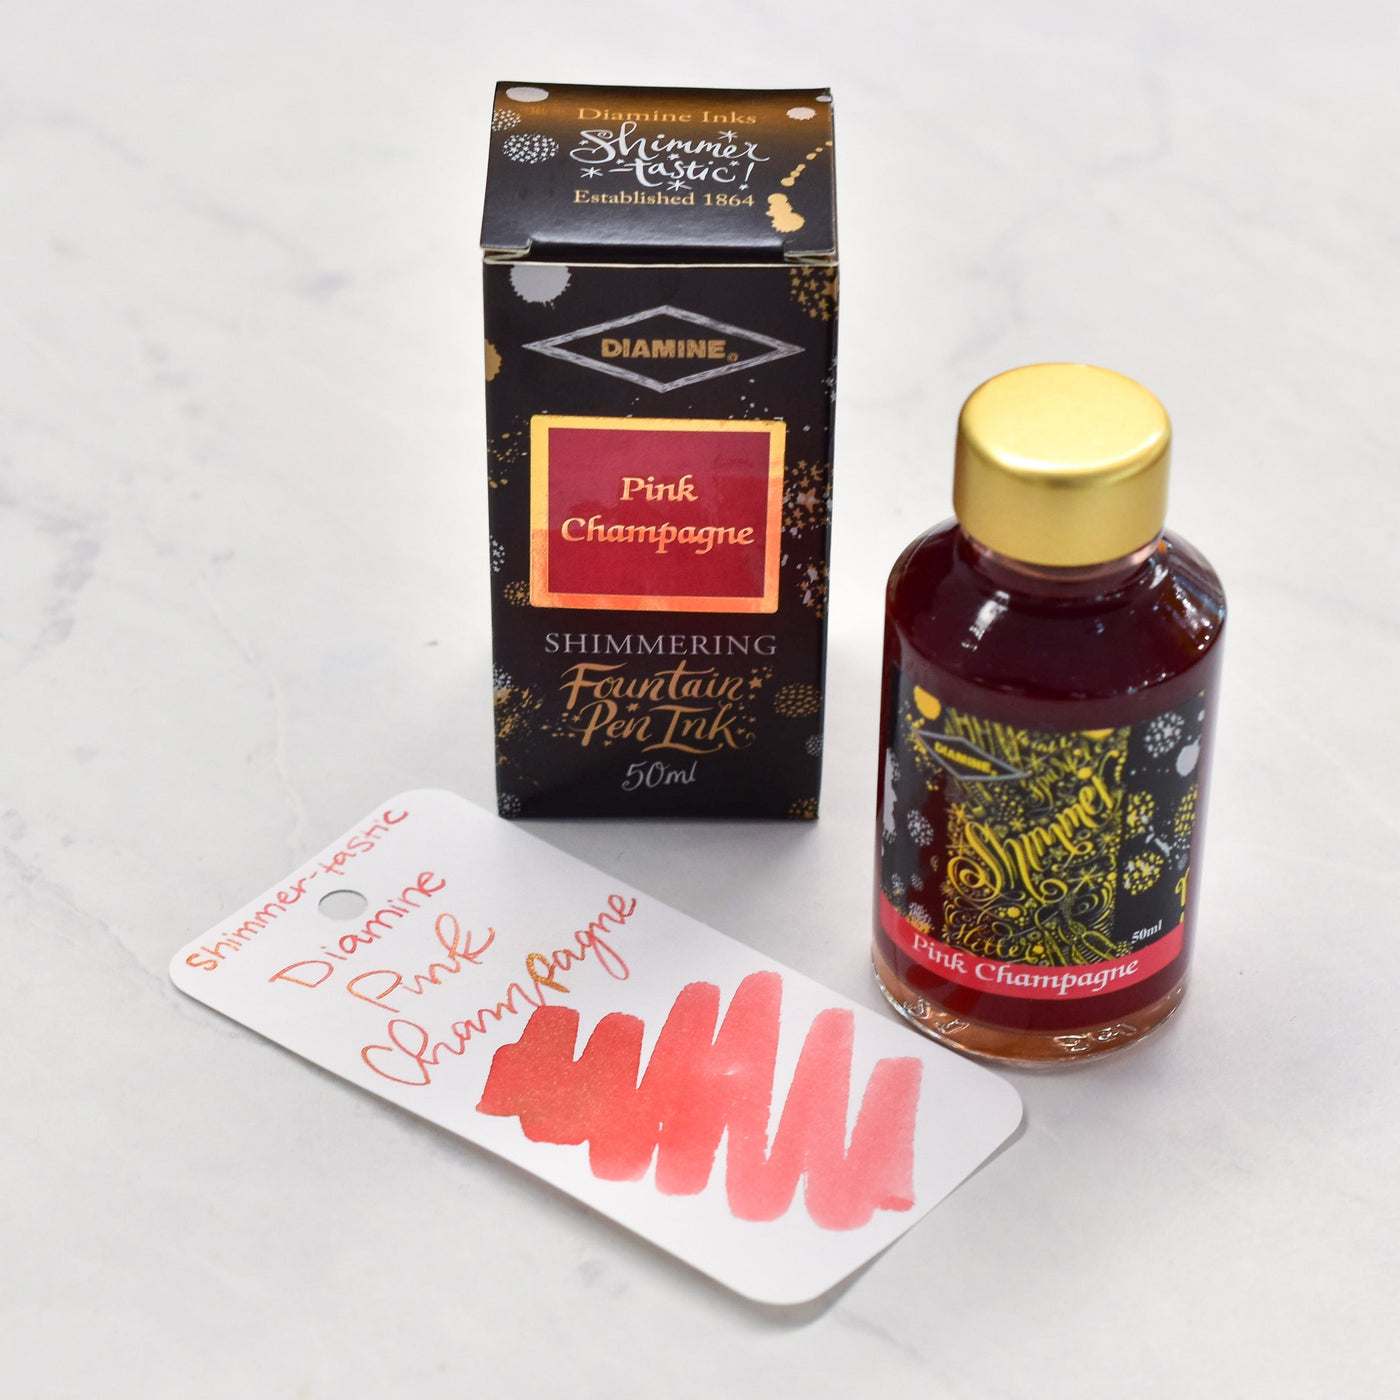 Diamine Shimmertastic Pink Champagne Fountain Pen Ink Bottle